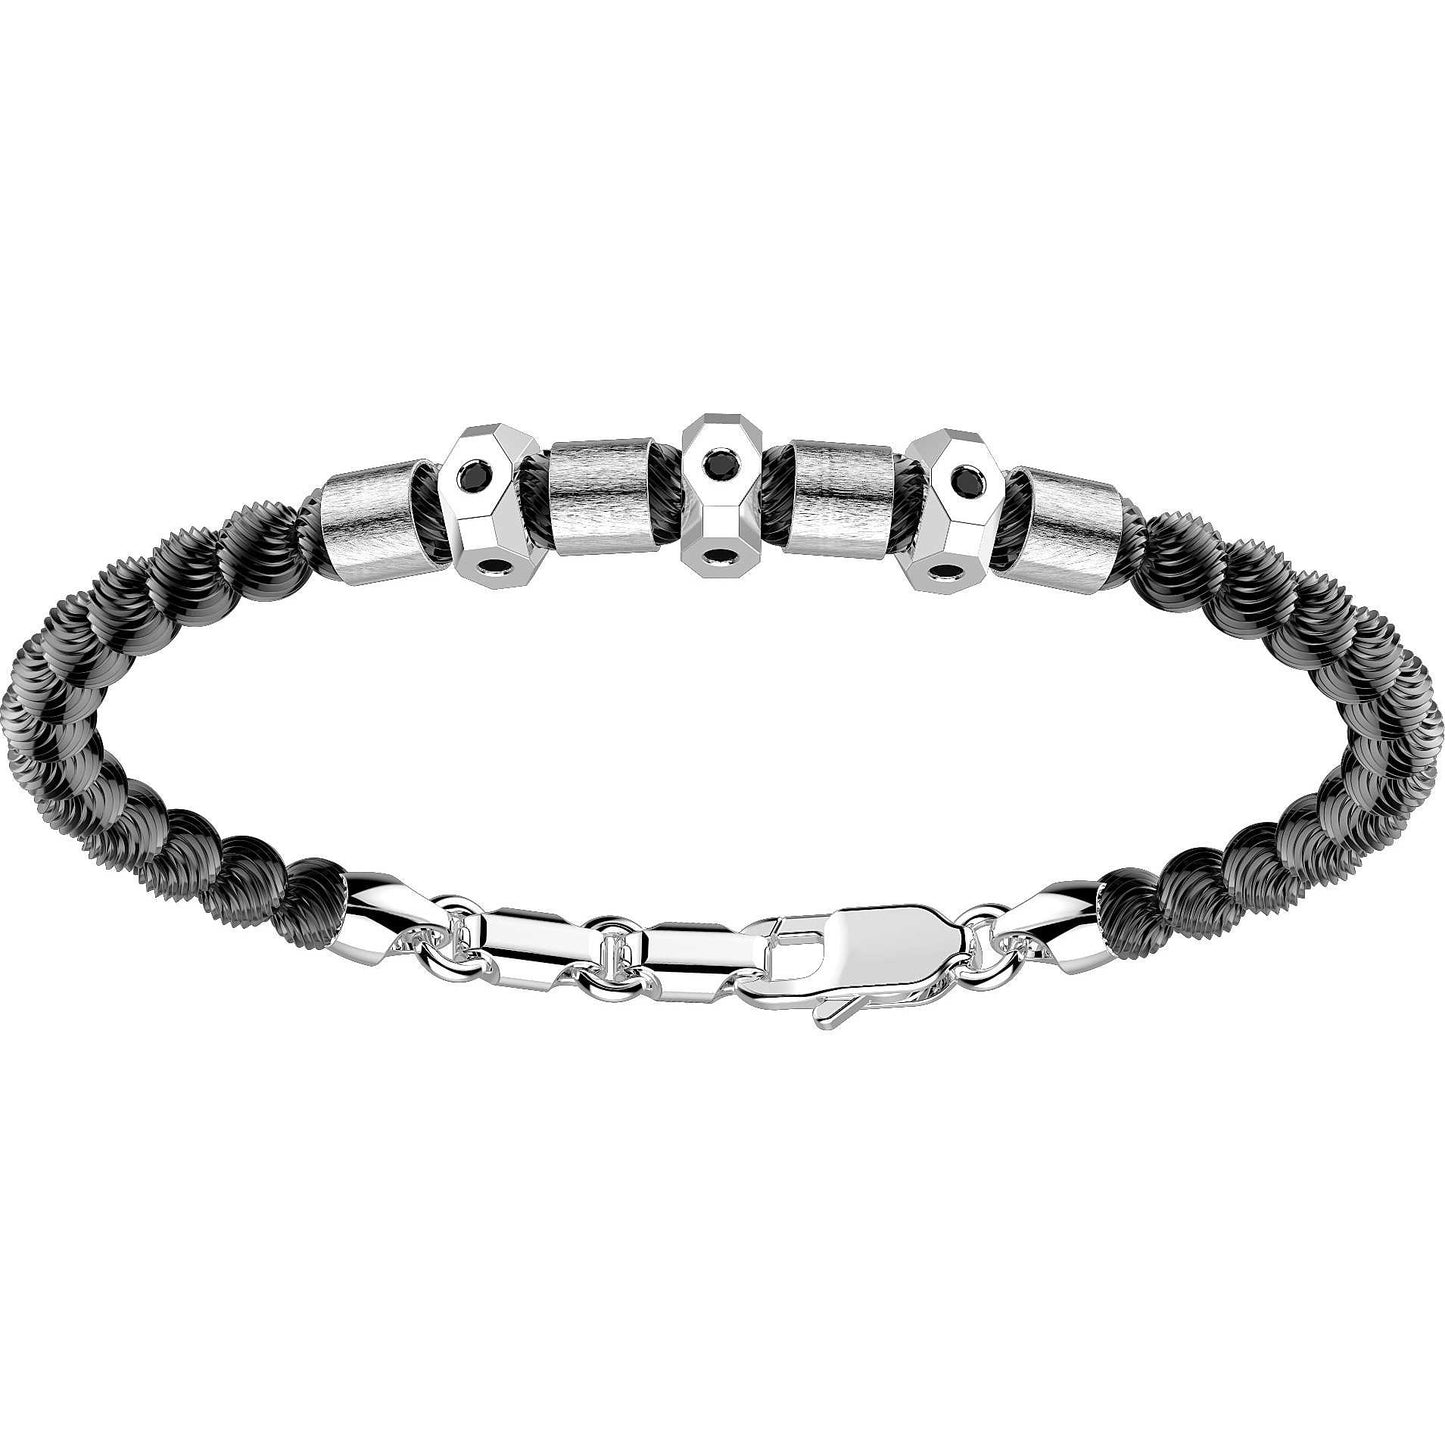 Silver Beads with Black Spinels Bracelet | Zancan | Luby 